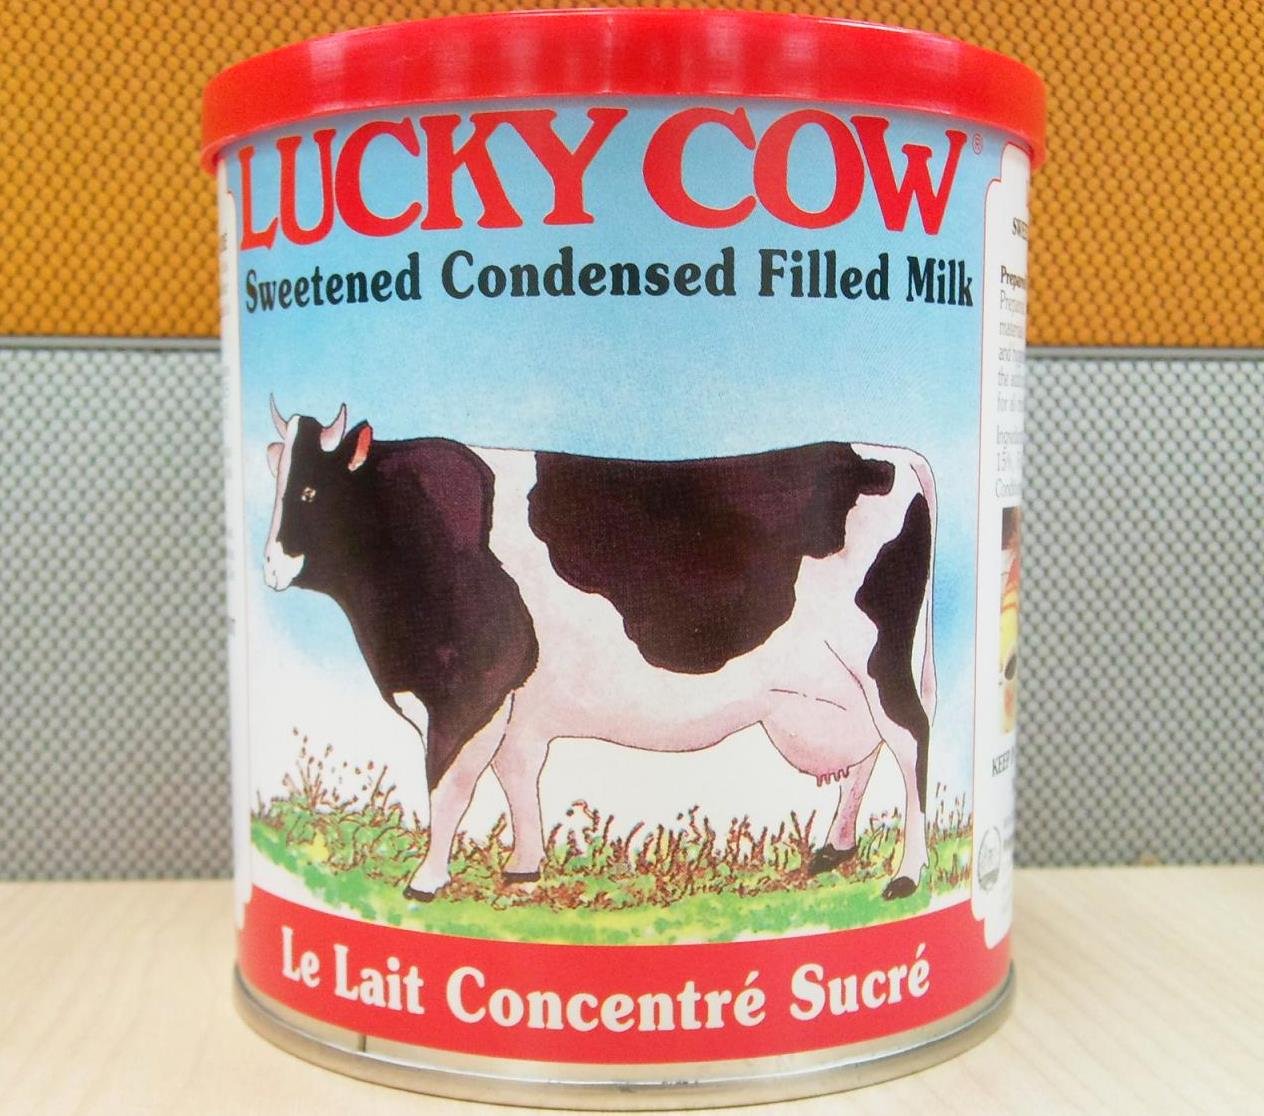 LUCKY COW Sweetened Condensed Filled Milk 1kg